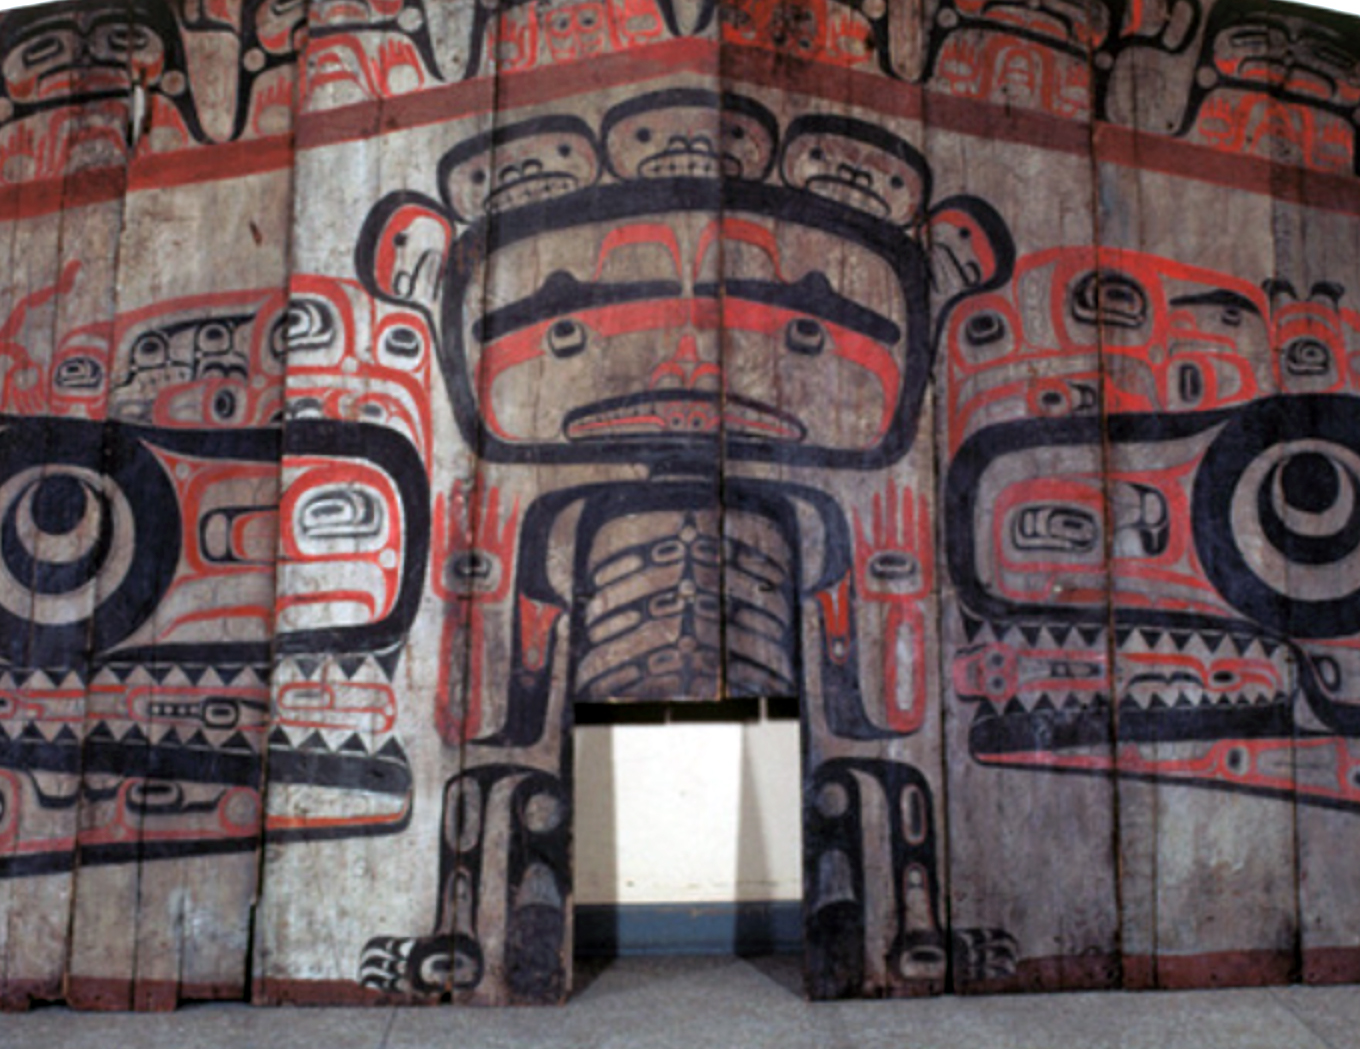 Detail of Nagunak, Tsimshian house front from Lax Kwʼalaams (Port Simpson), British Columbia, mid 19th century (National Museum of Natural History, Smithsonian Institution)